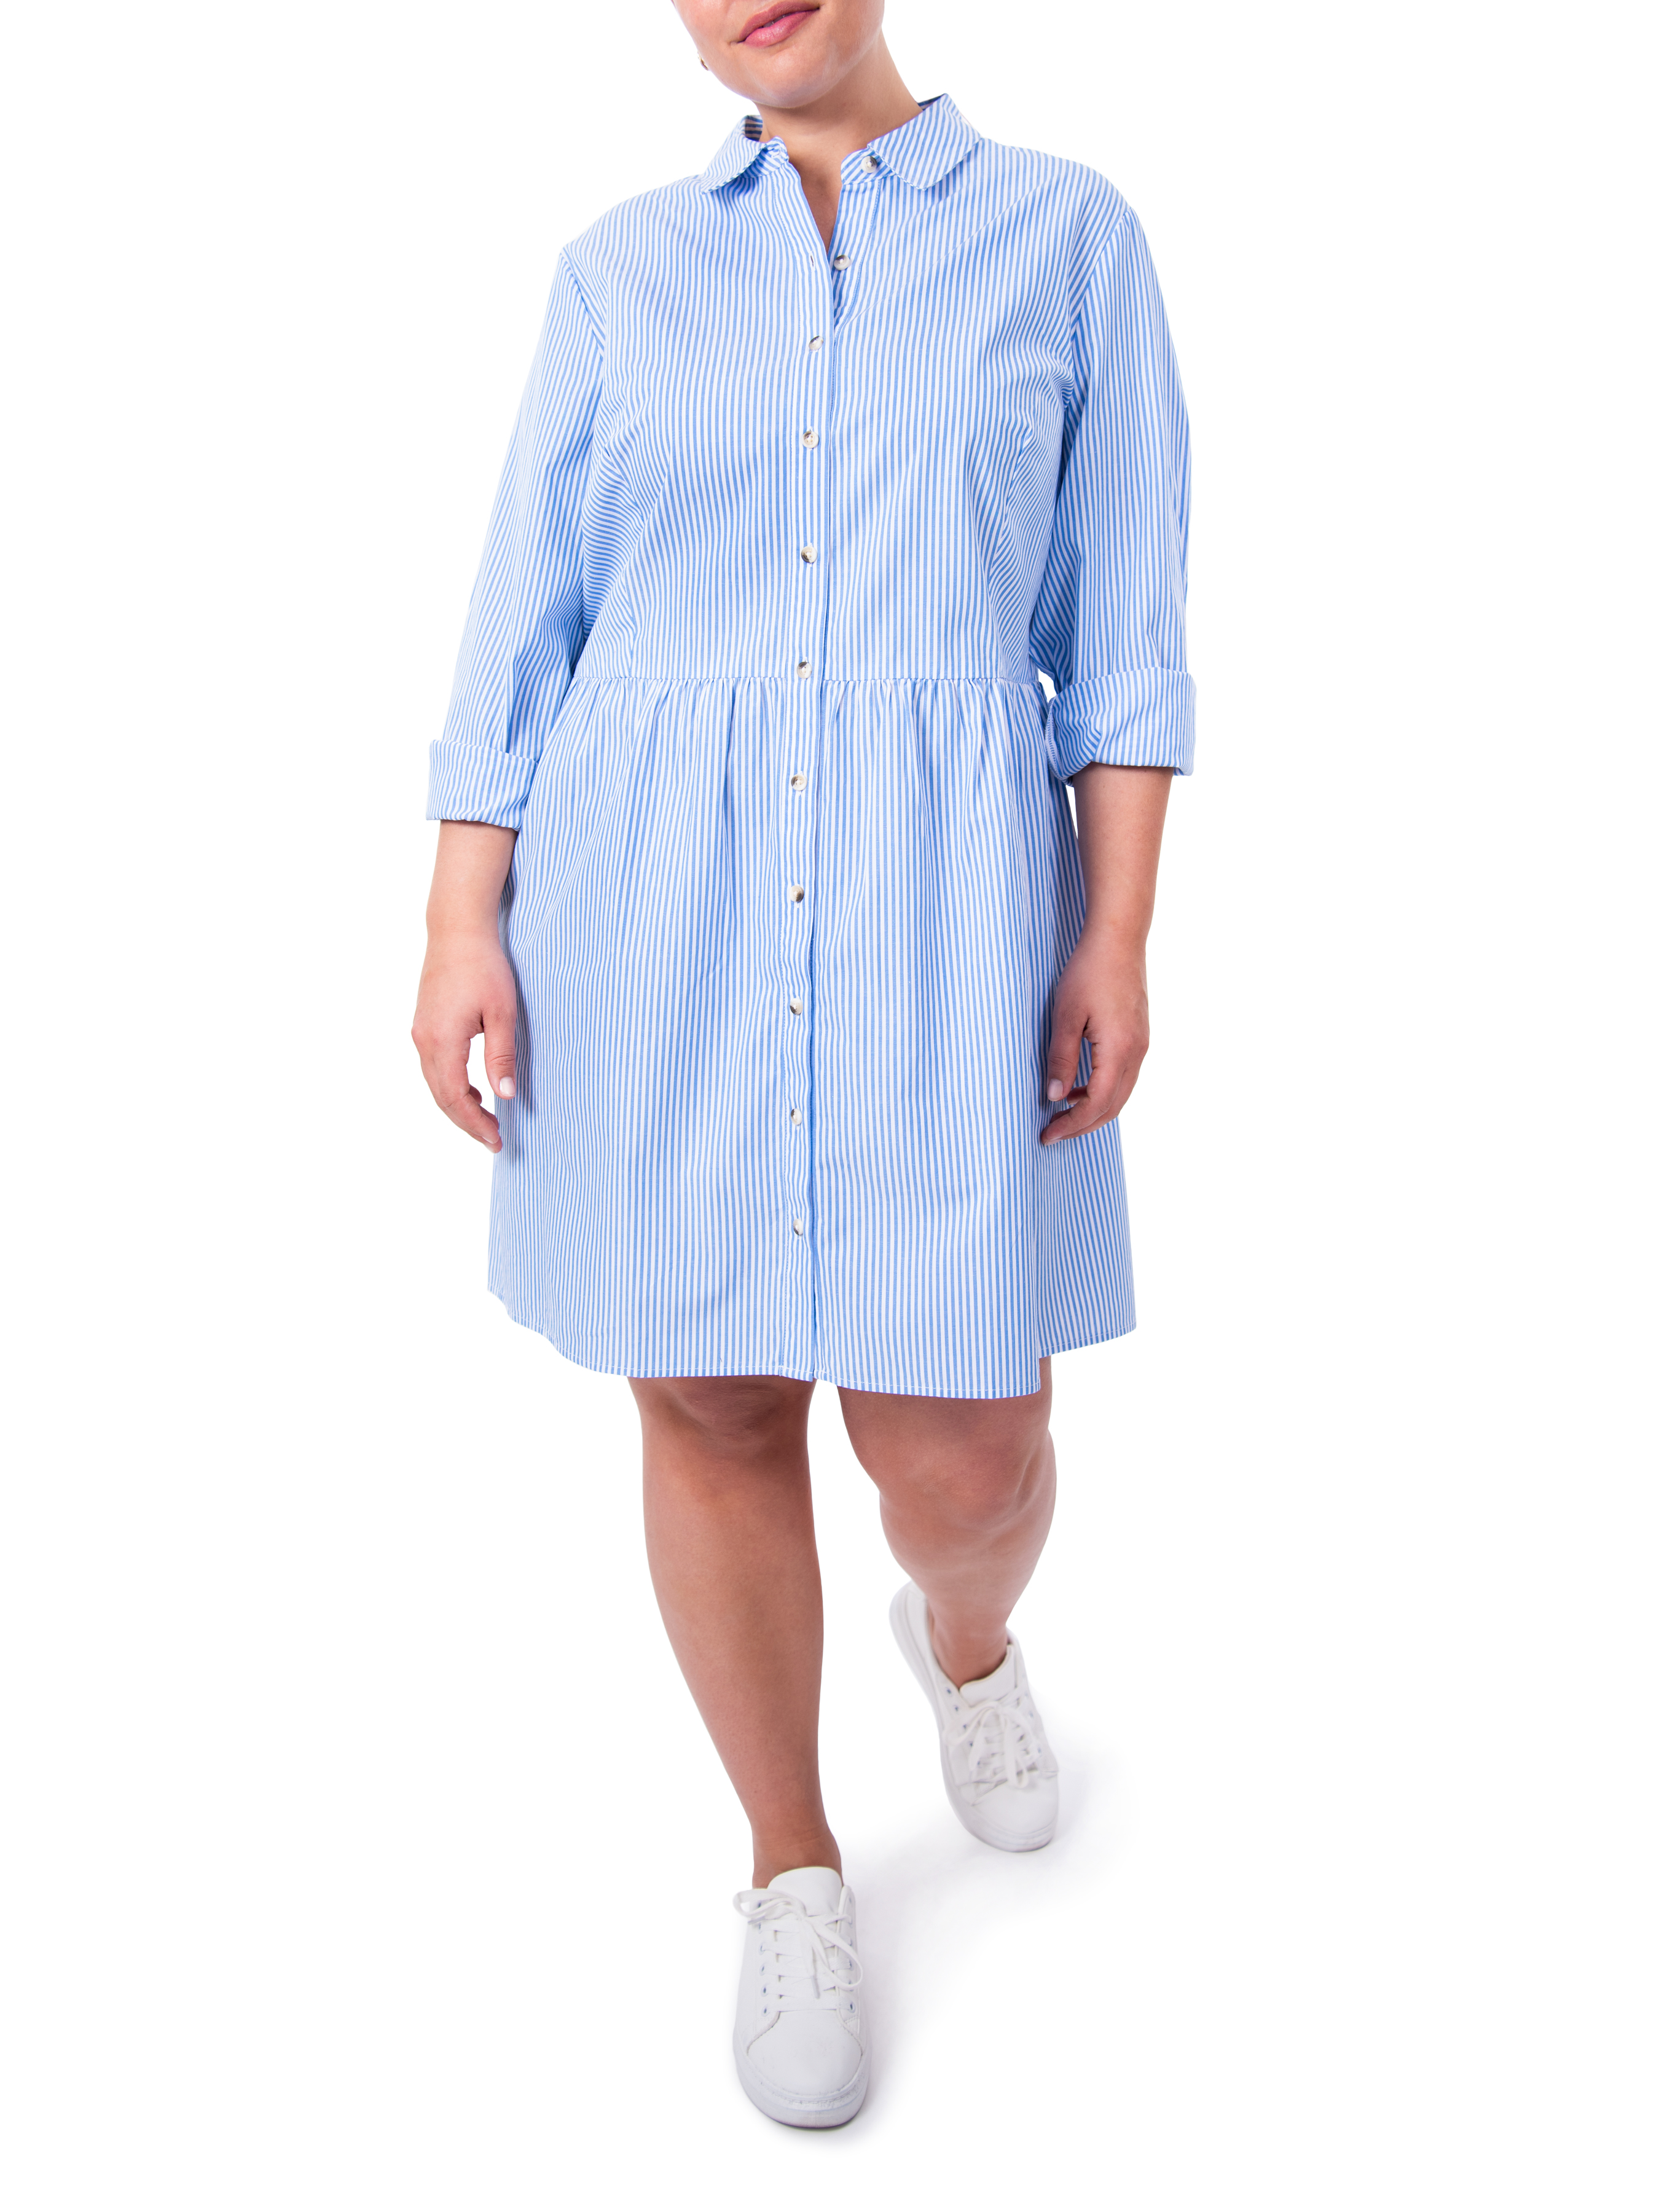 Nine.Eight Women's Plus Size Mini Shirtdress with Long Sleeves - image 1 of 6